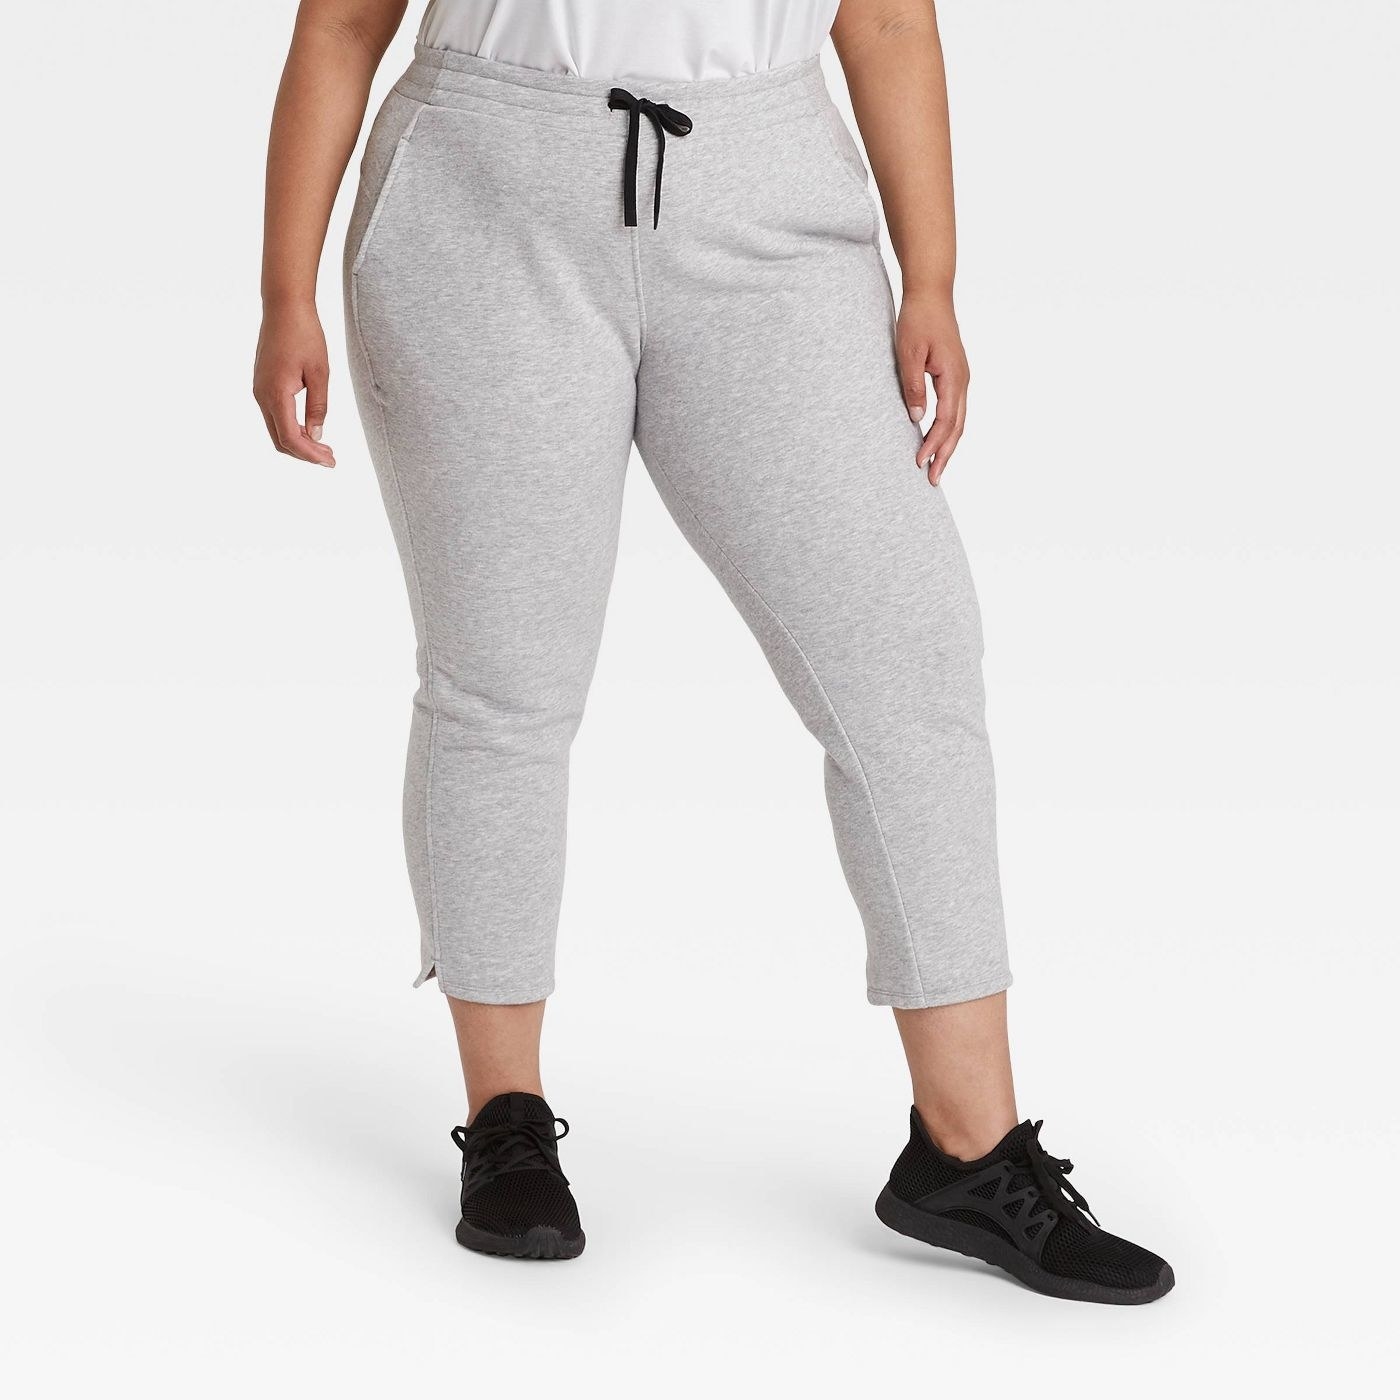 31 Cute And Comfy Things From Target That’ll Prove Athleisure Is Always A Good Decision